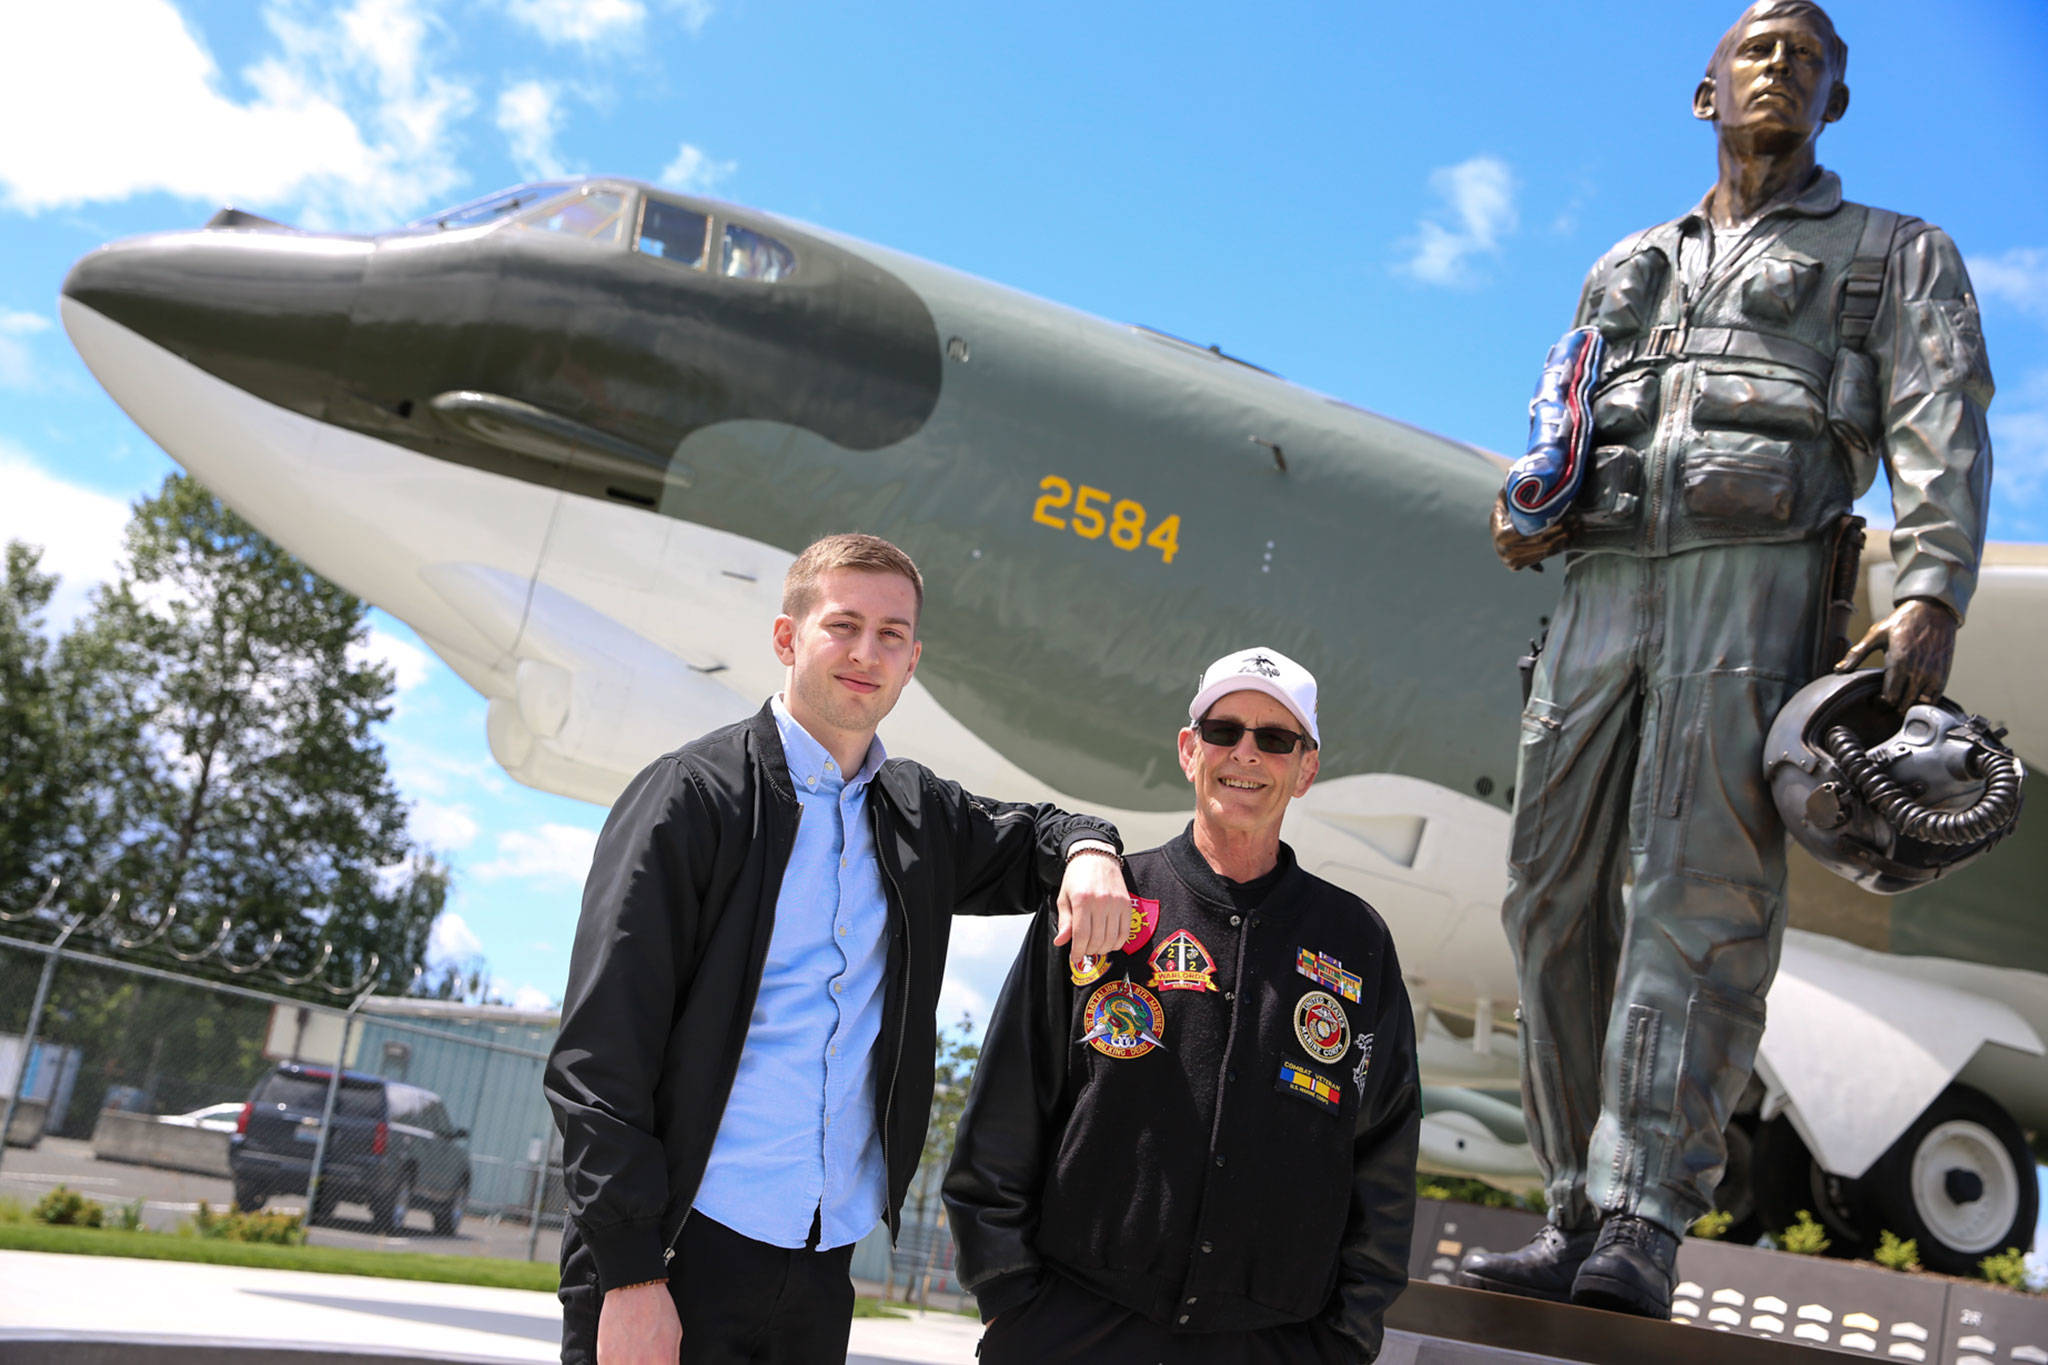 Evan Thompson and his father, Jim Thompson, near a restored B-52 at Vietnam Veterans Memorial Park in Tukwila. The elder Thompson served in Vietnam, and credits the bomber for helping him survive the war. (Kevin Clark / The Herald)